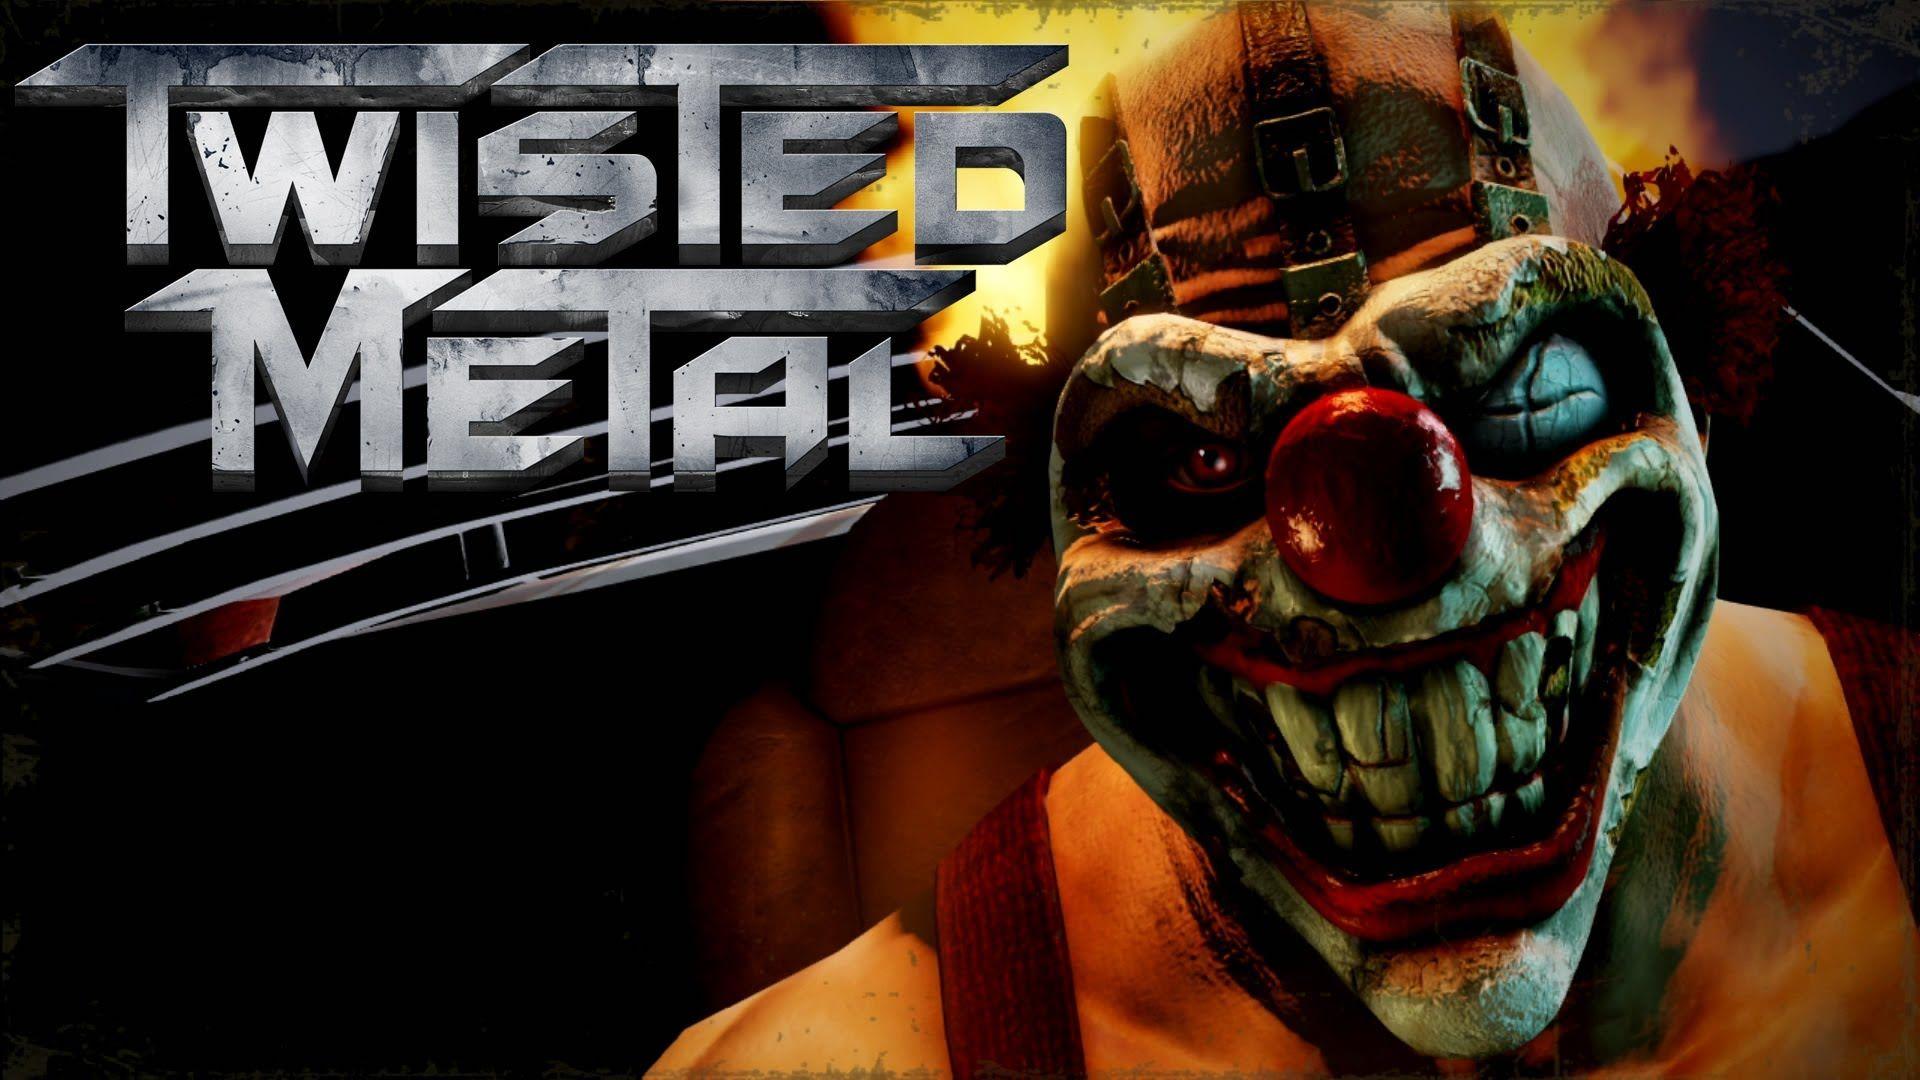 Image For Twisted Metal Ps3 Wallpapers.